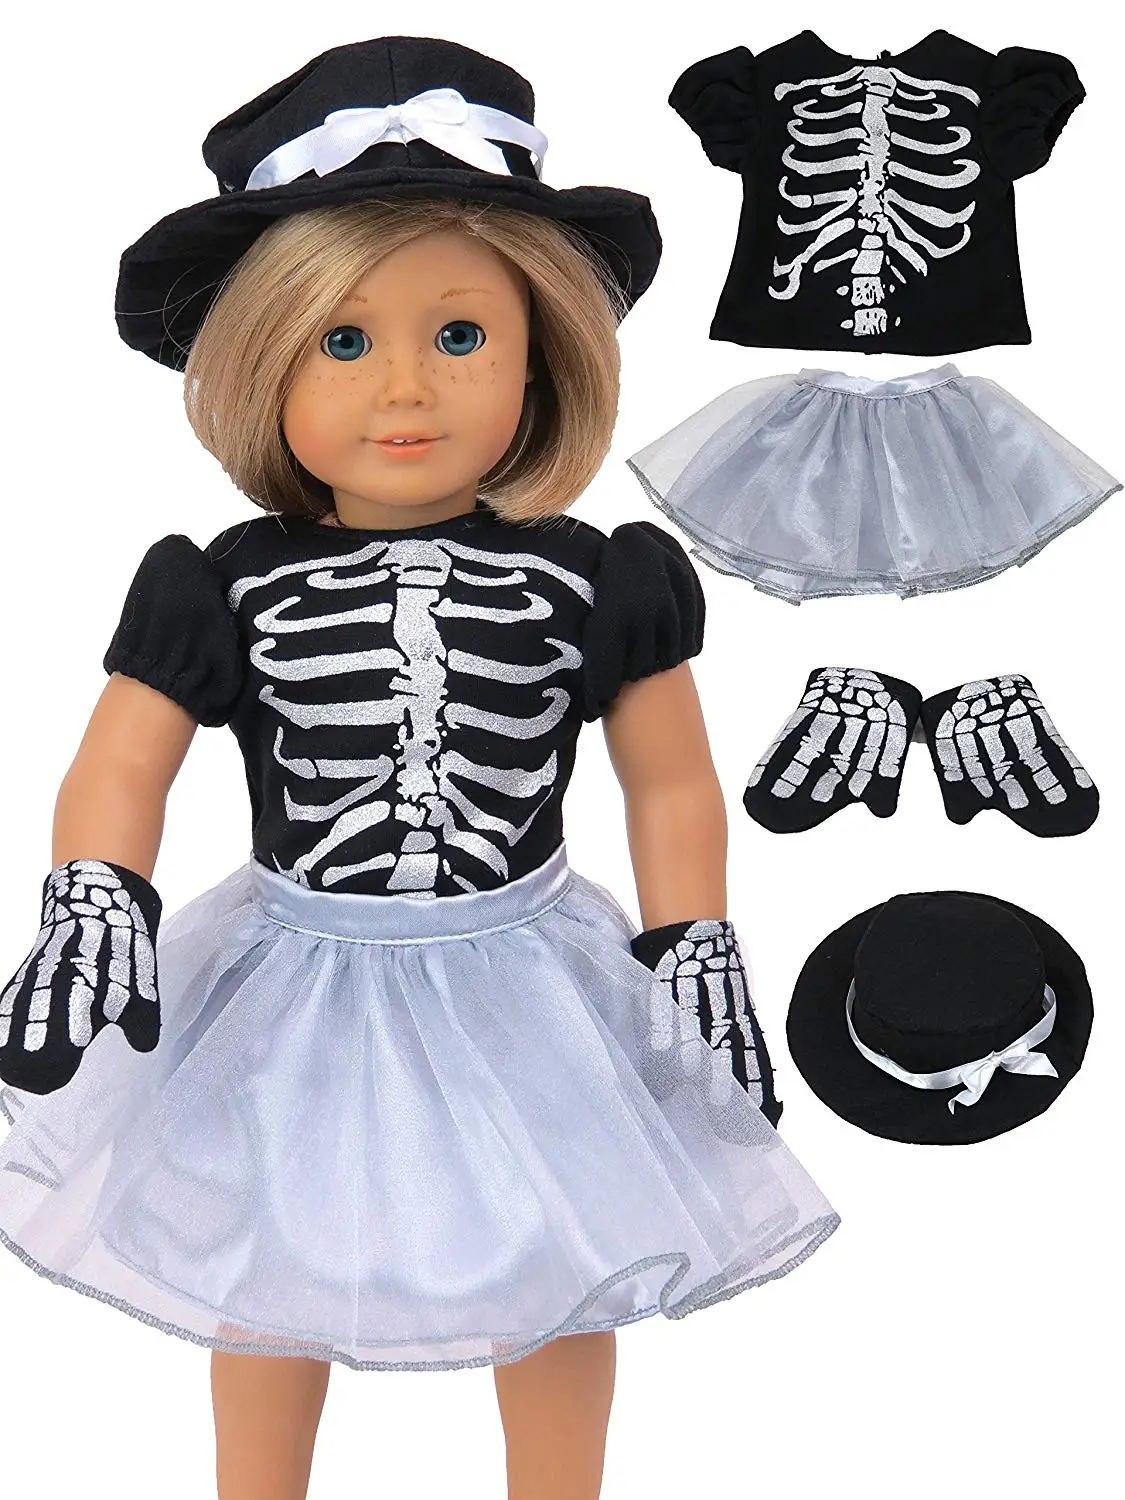 Cheap Free American Girl Doll Clothes Find Free American Girl Doll Clothes Deals On Line At